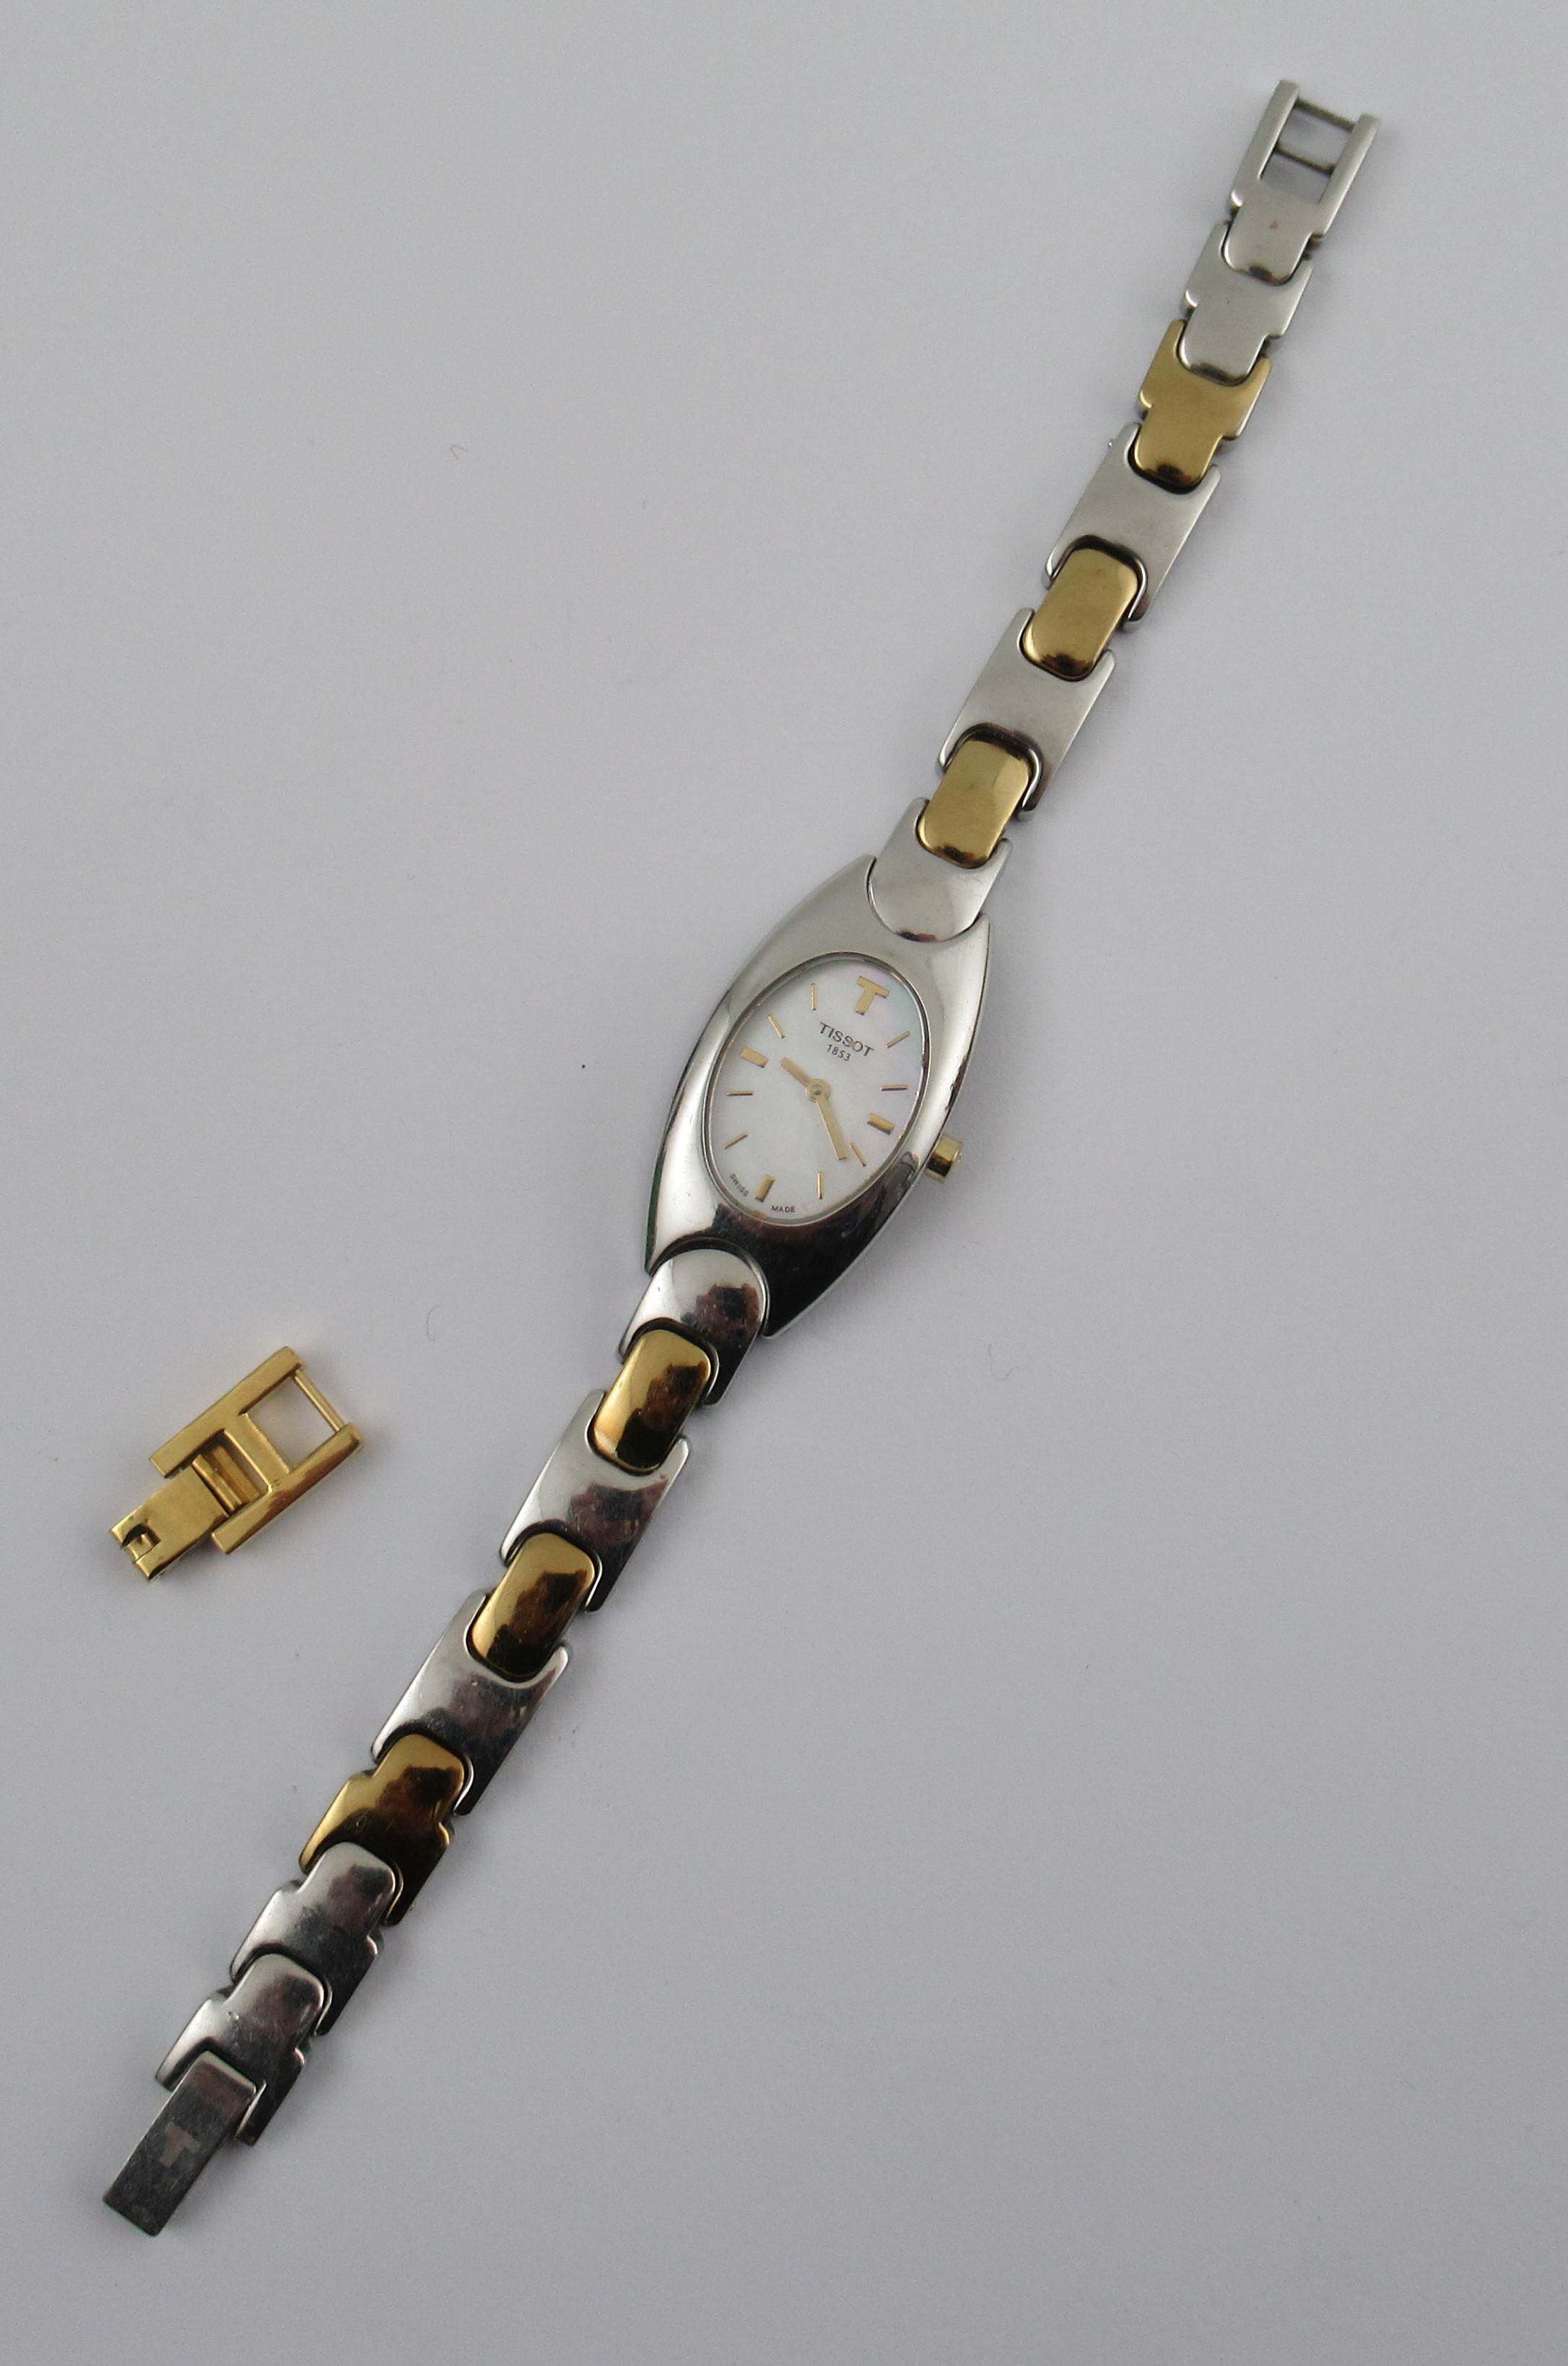 A Tissot stainless steel dress watch, with bimetal link strap, in case